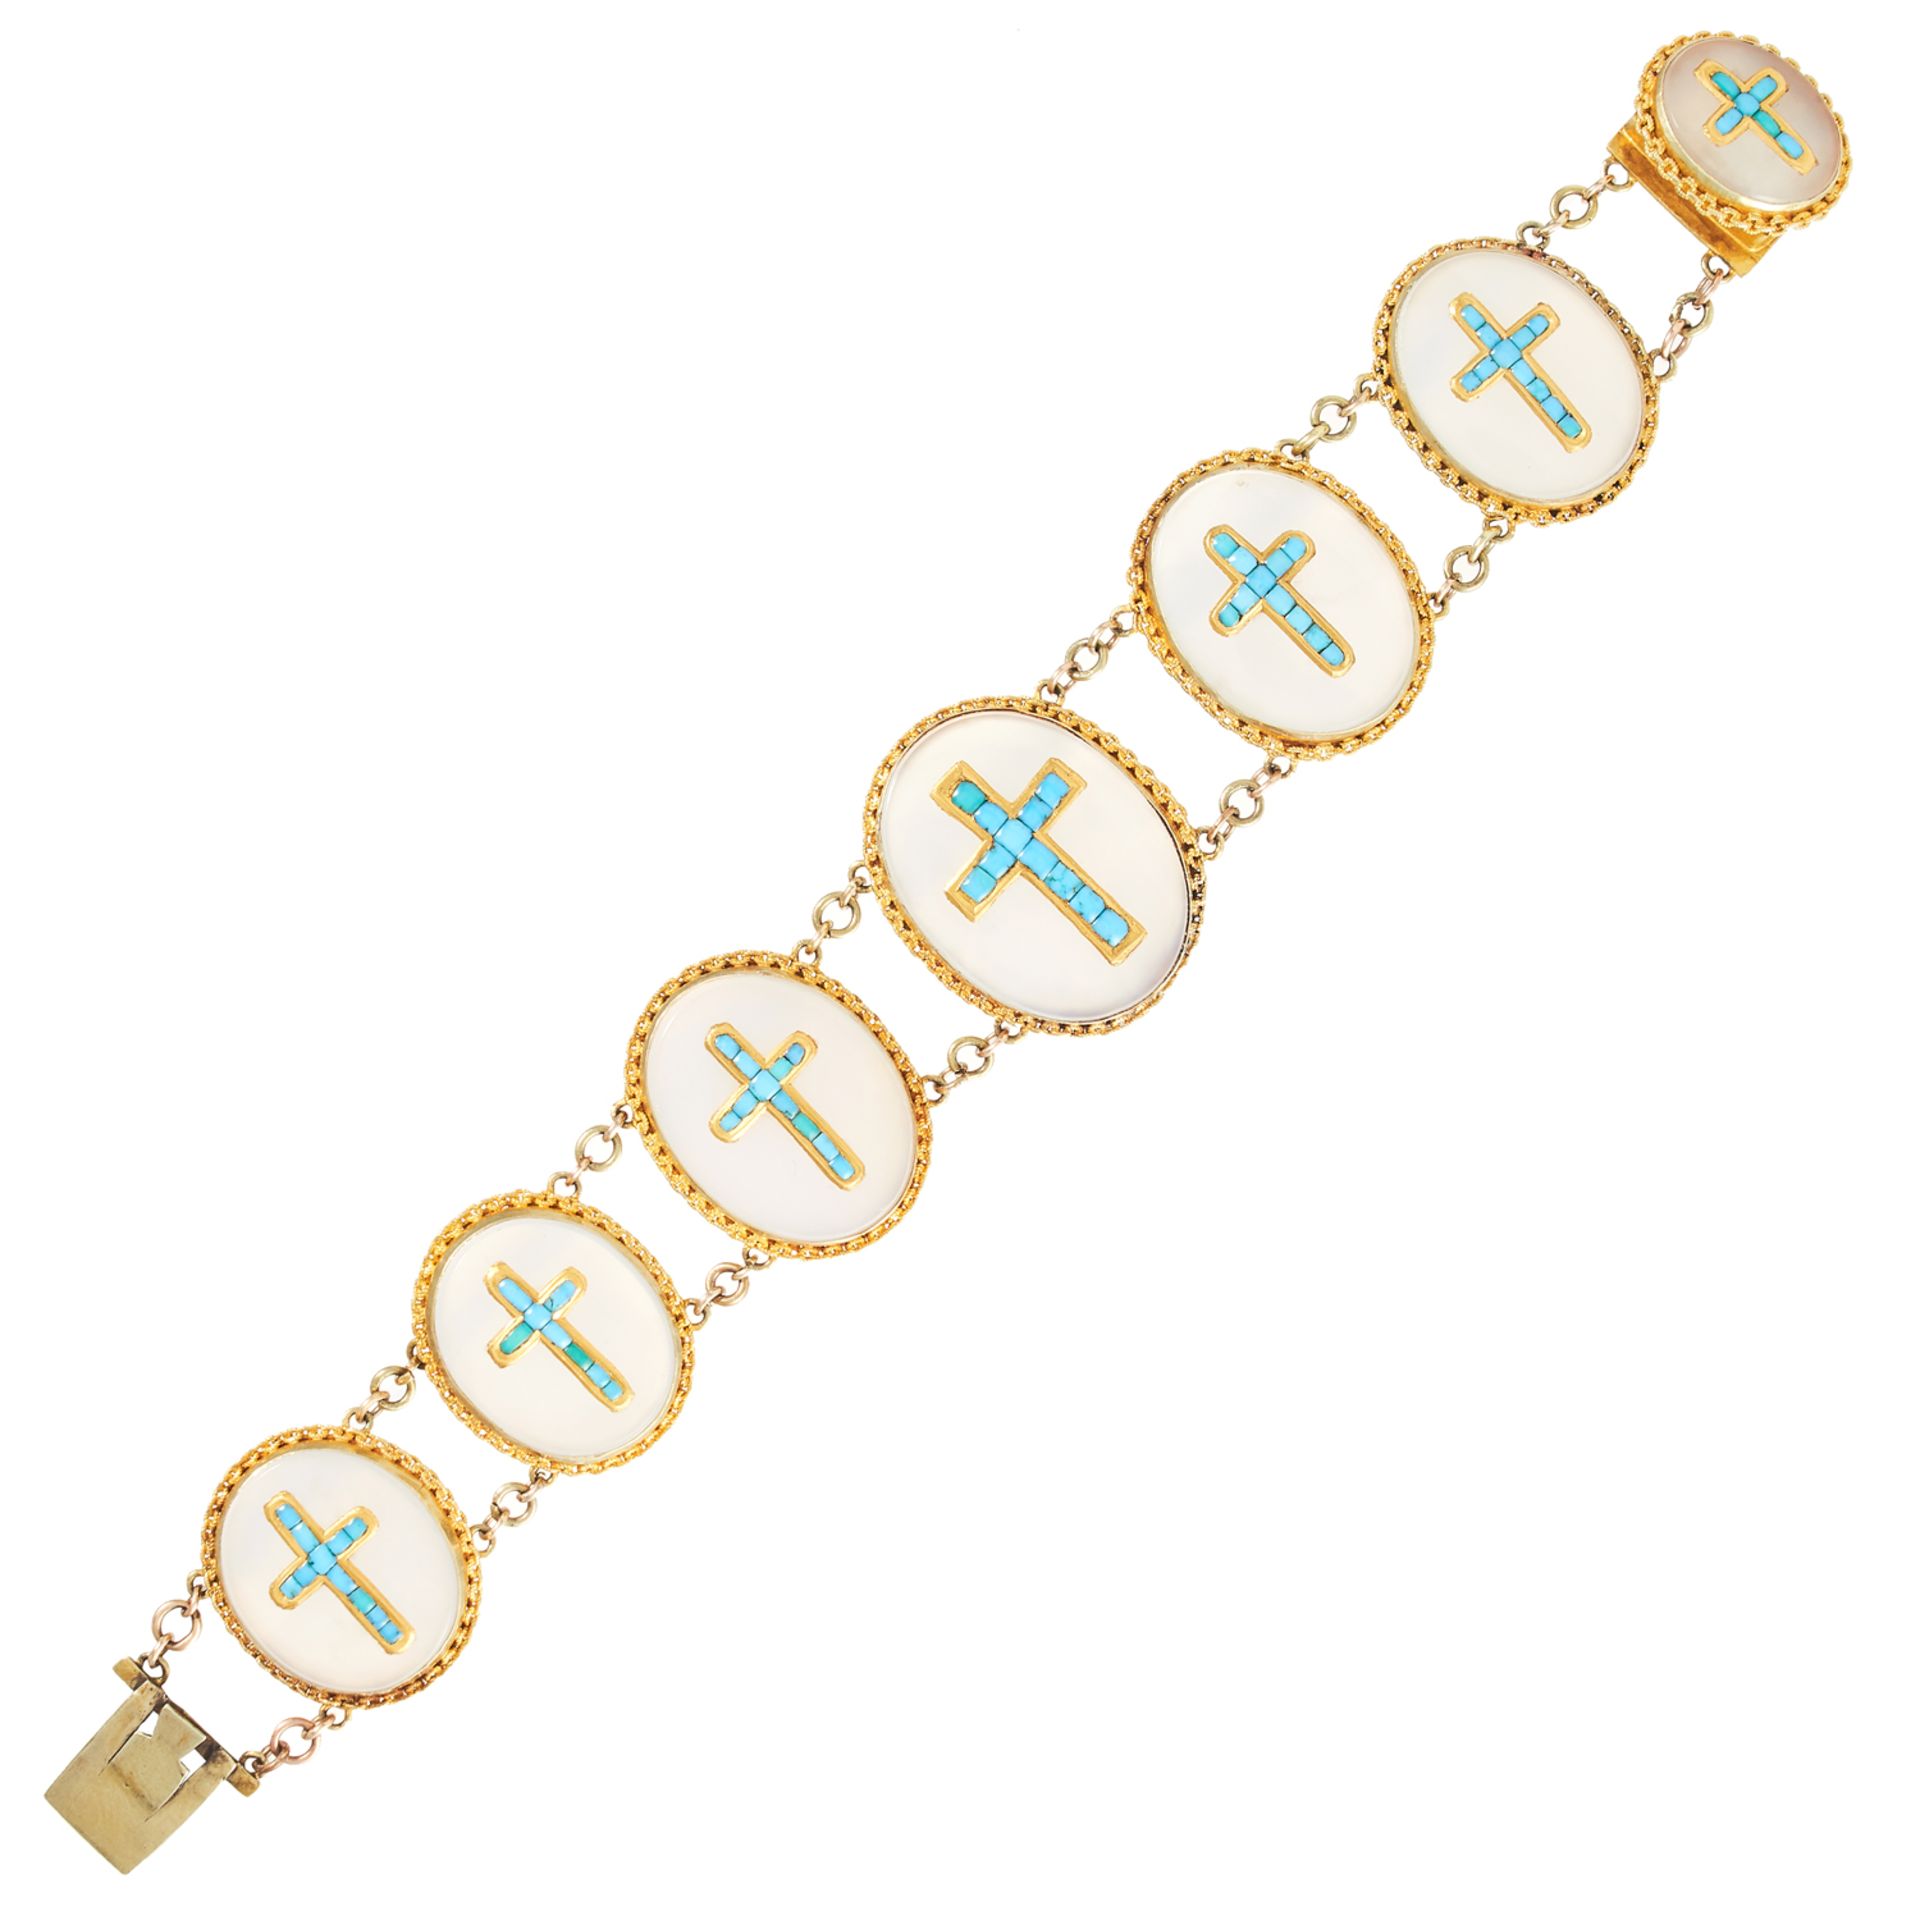 AN ANTIQUE TURQUOISE AND CHALCEDONY BRACELET, 19TH CENTURY in high carat yellow gold, comprising